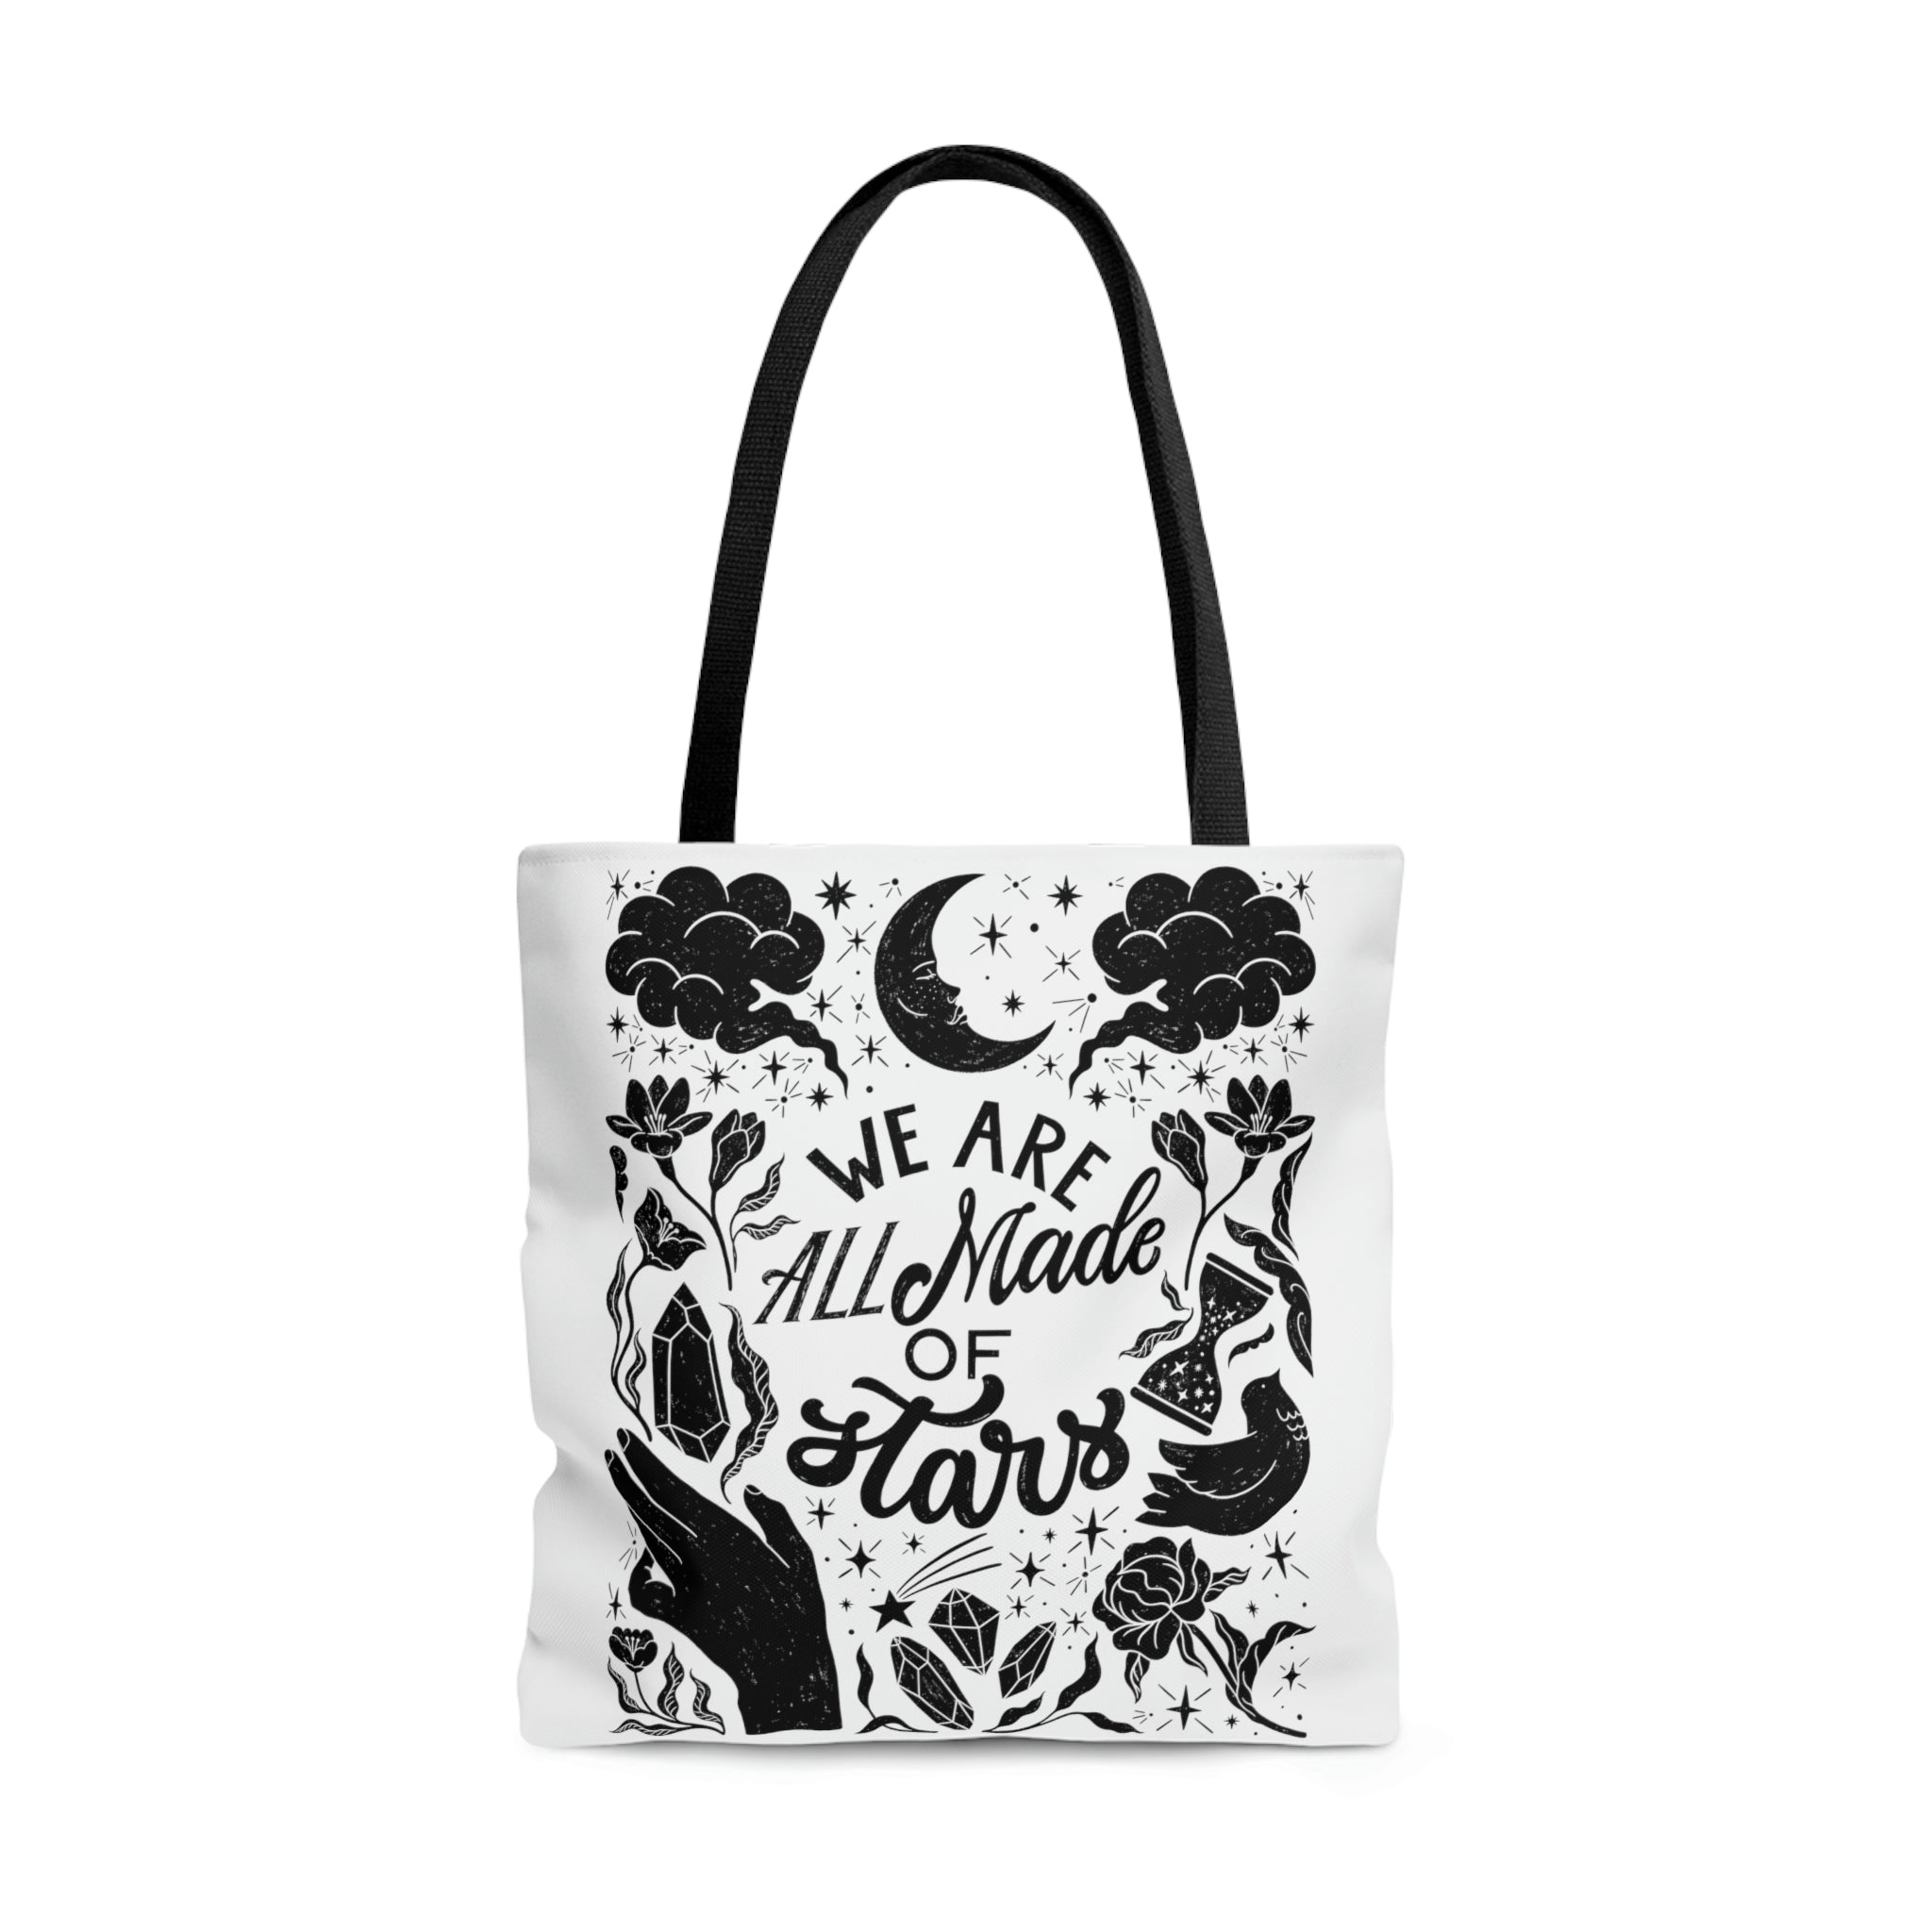 We Are All Made of Stars Tote Bag